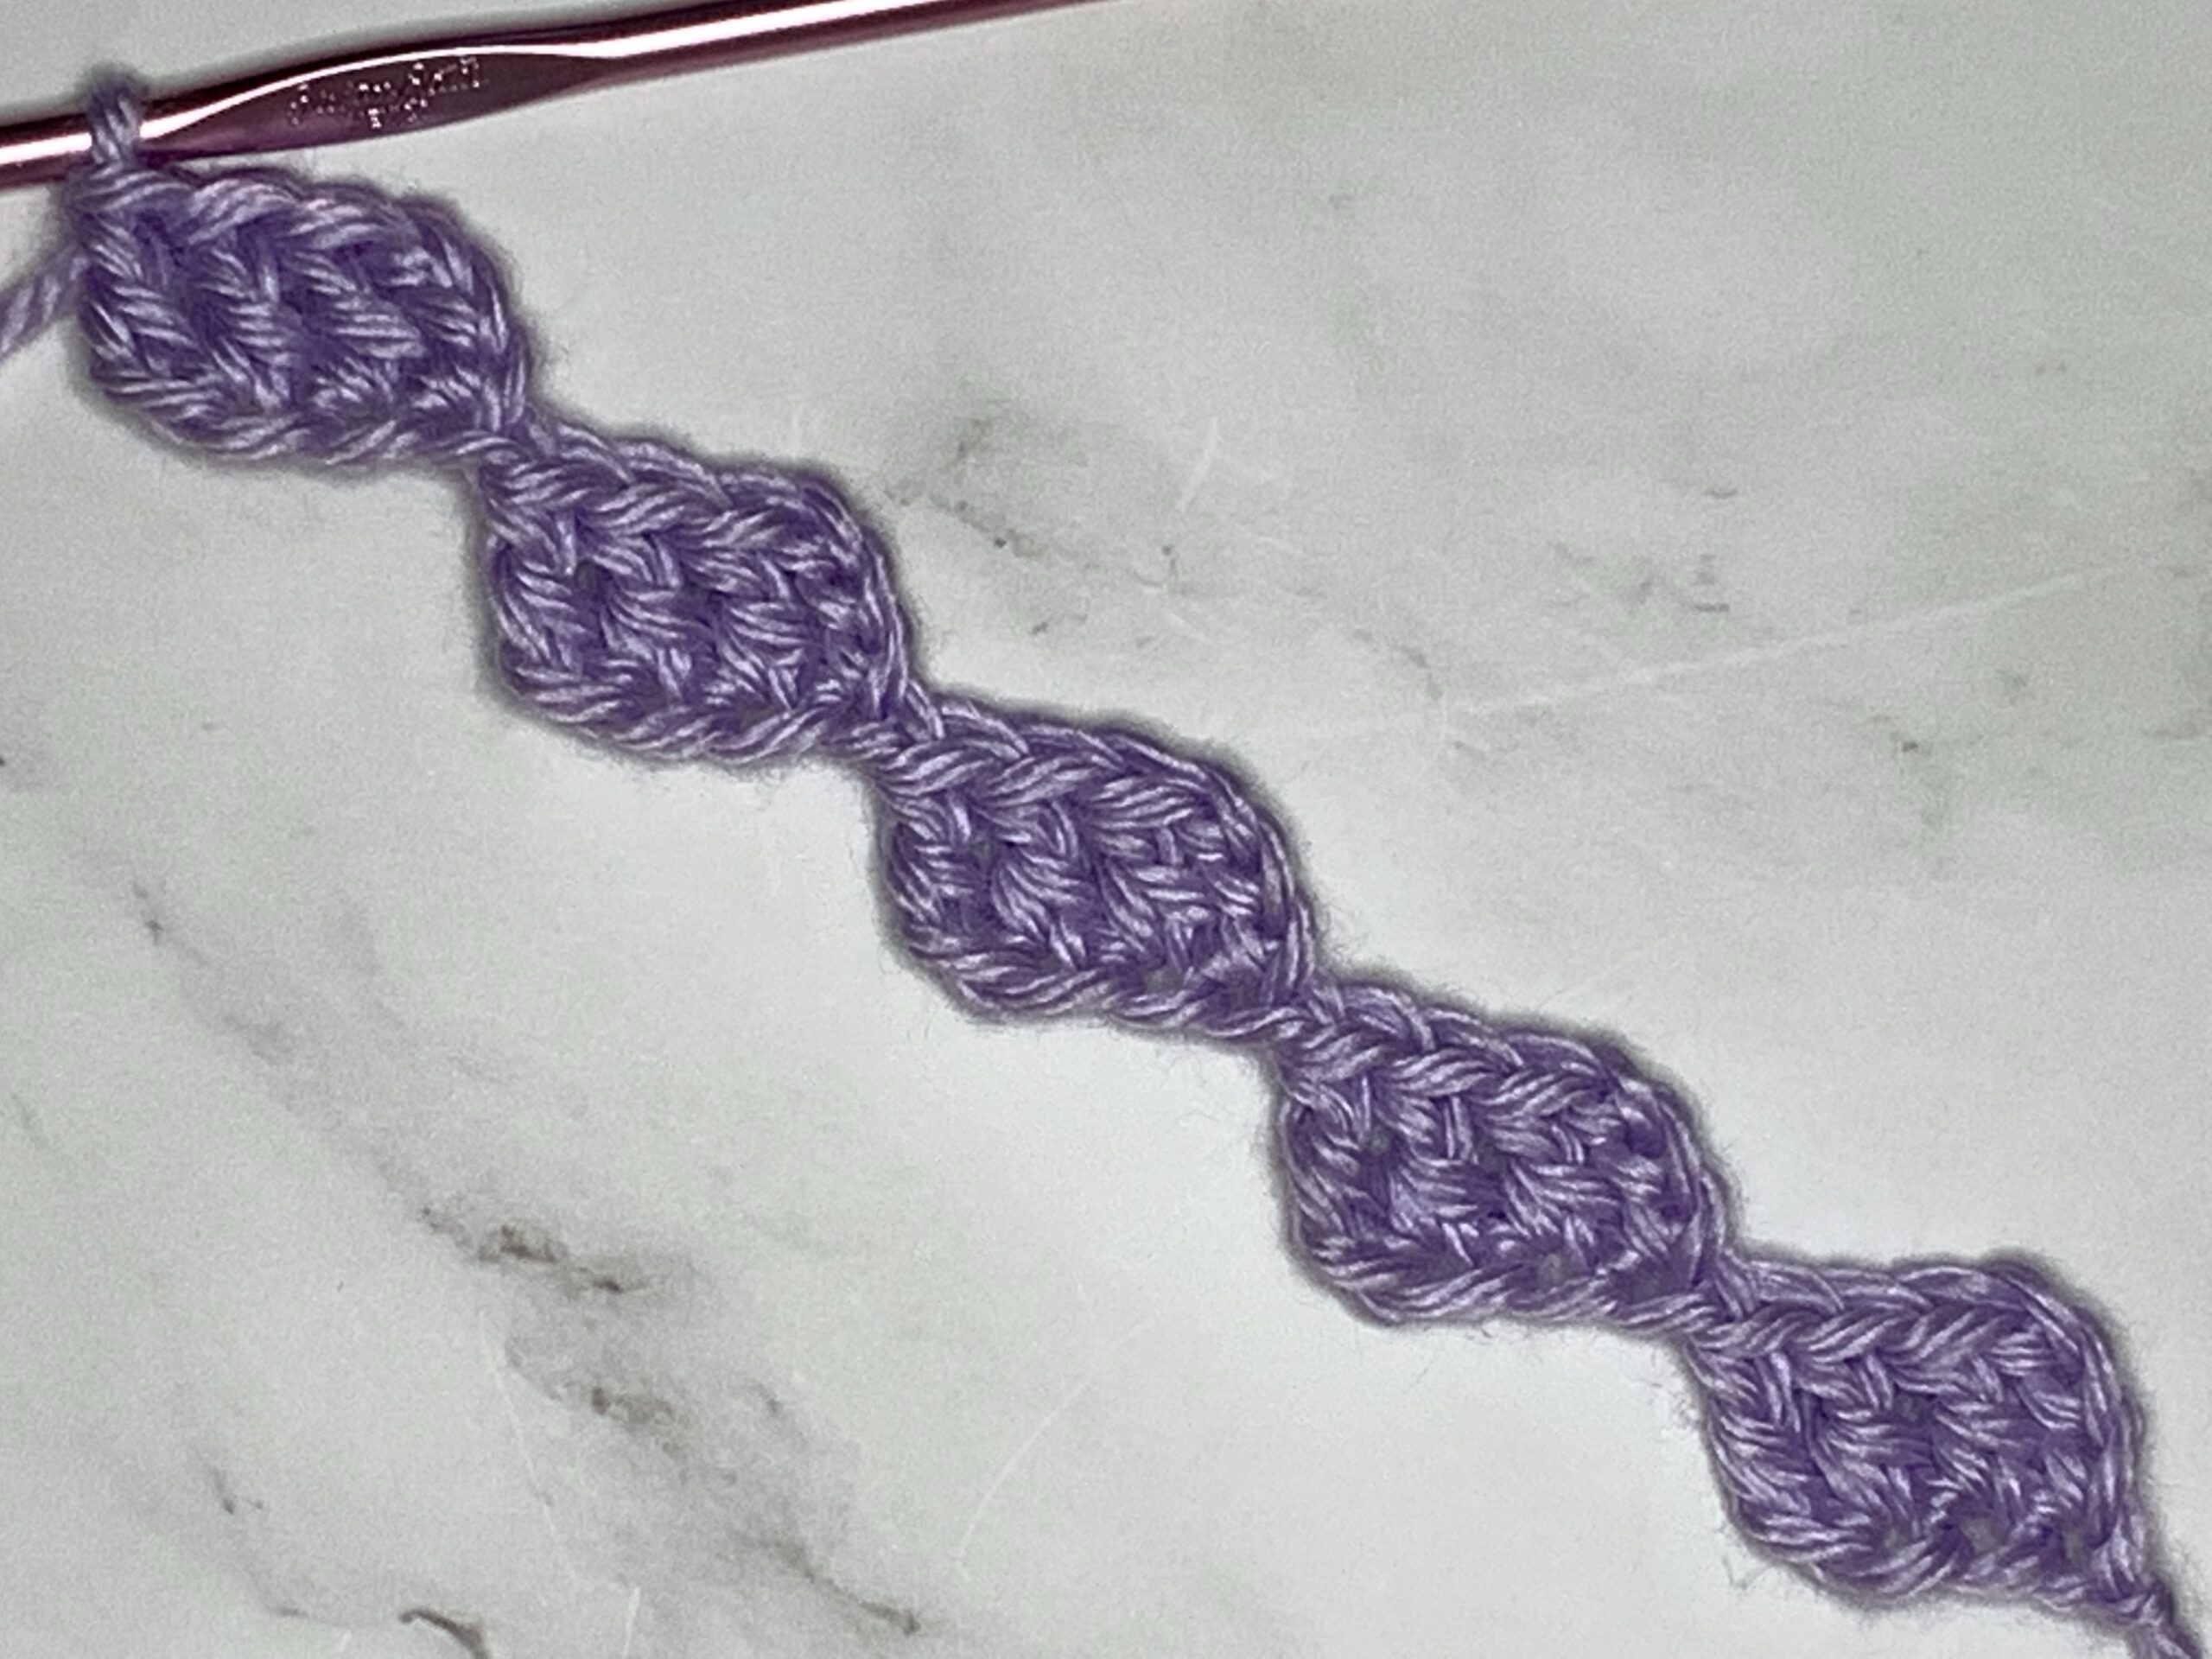 a string of floating crochet stitches